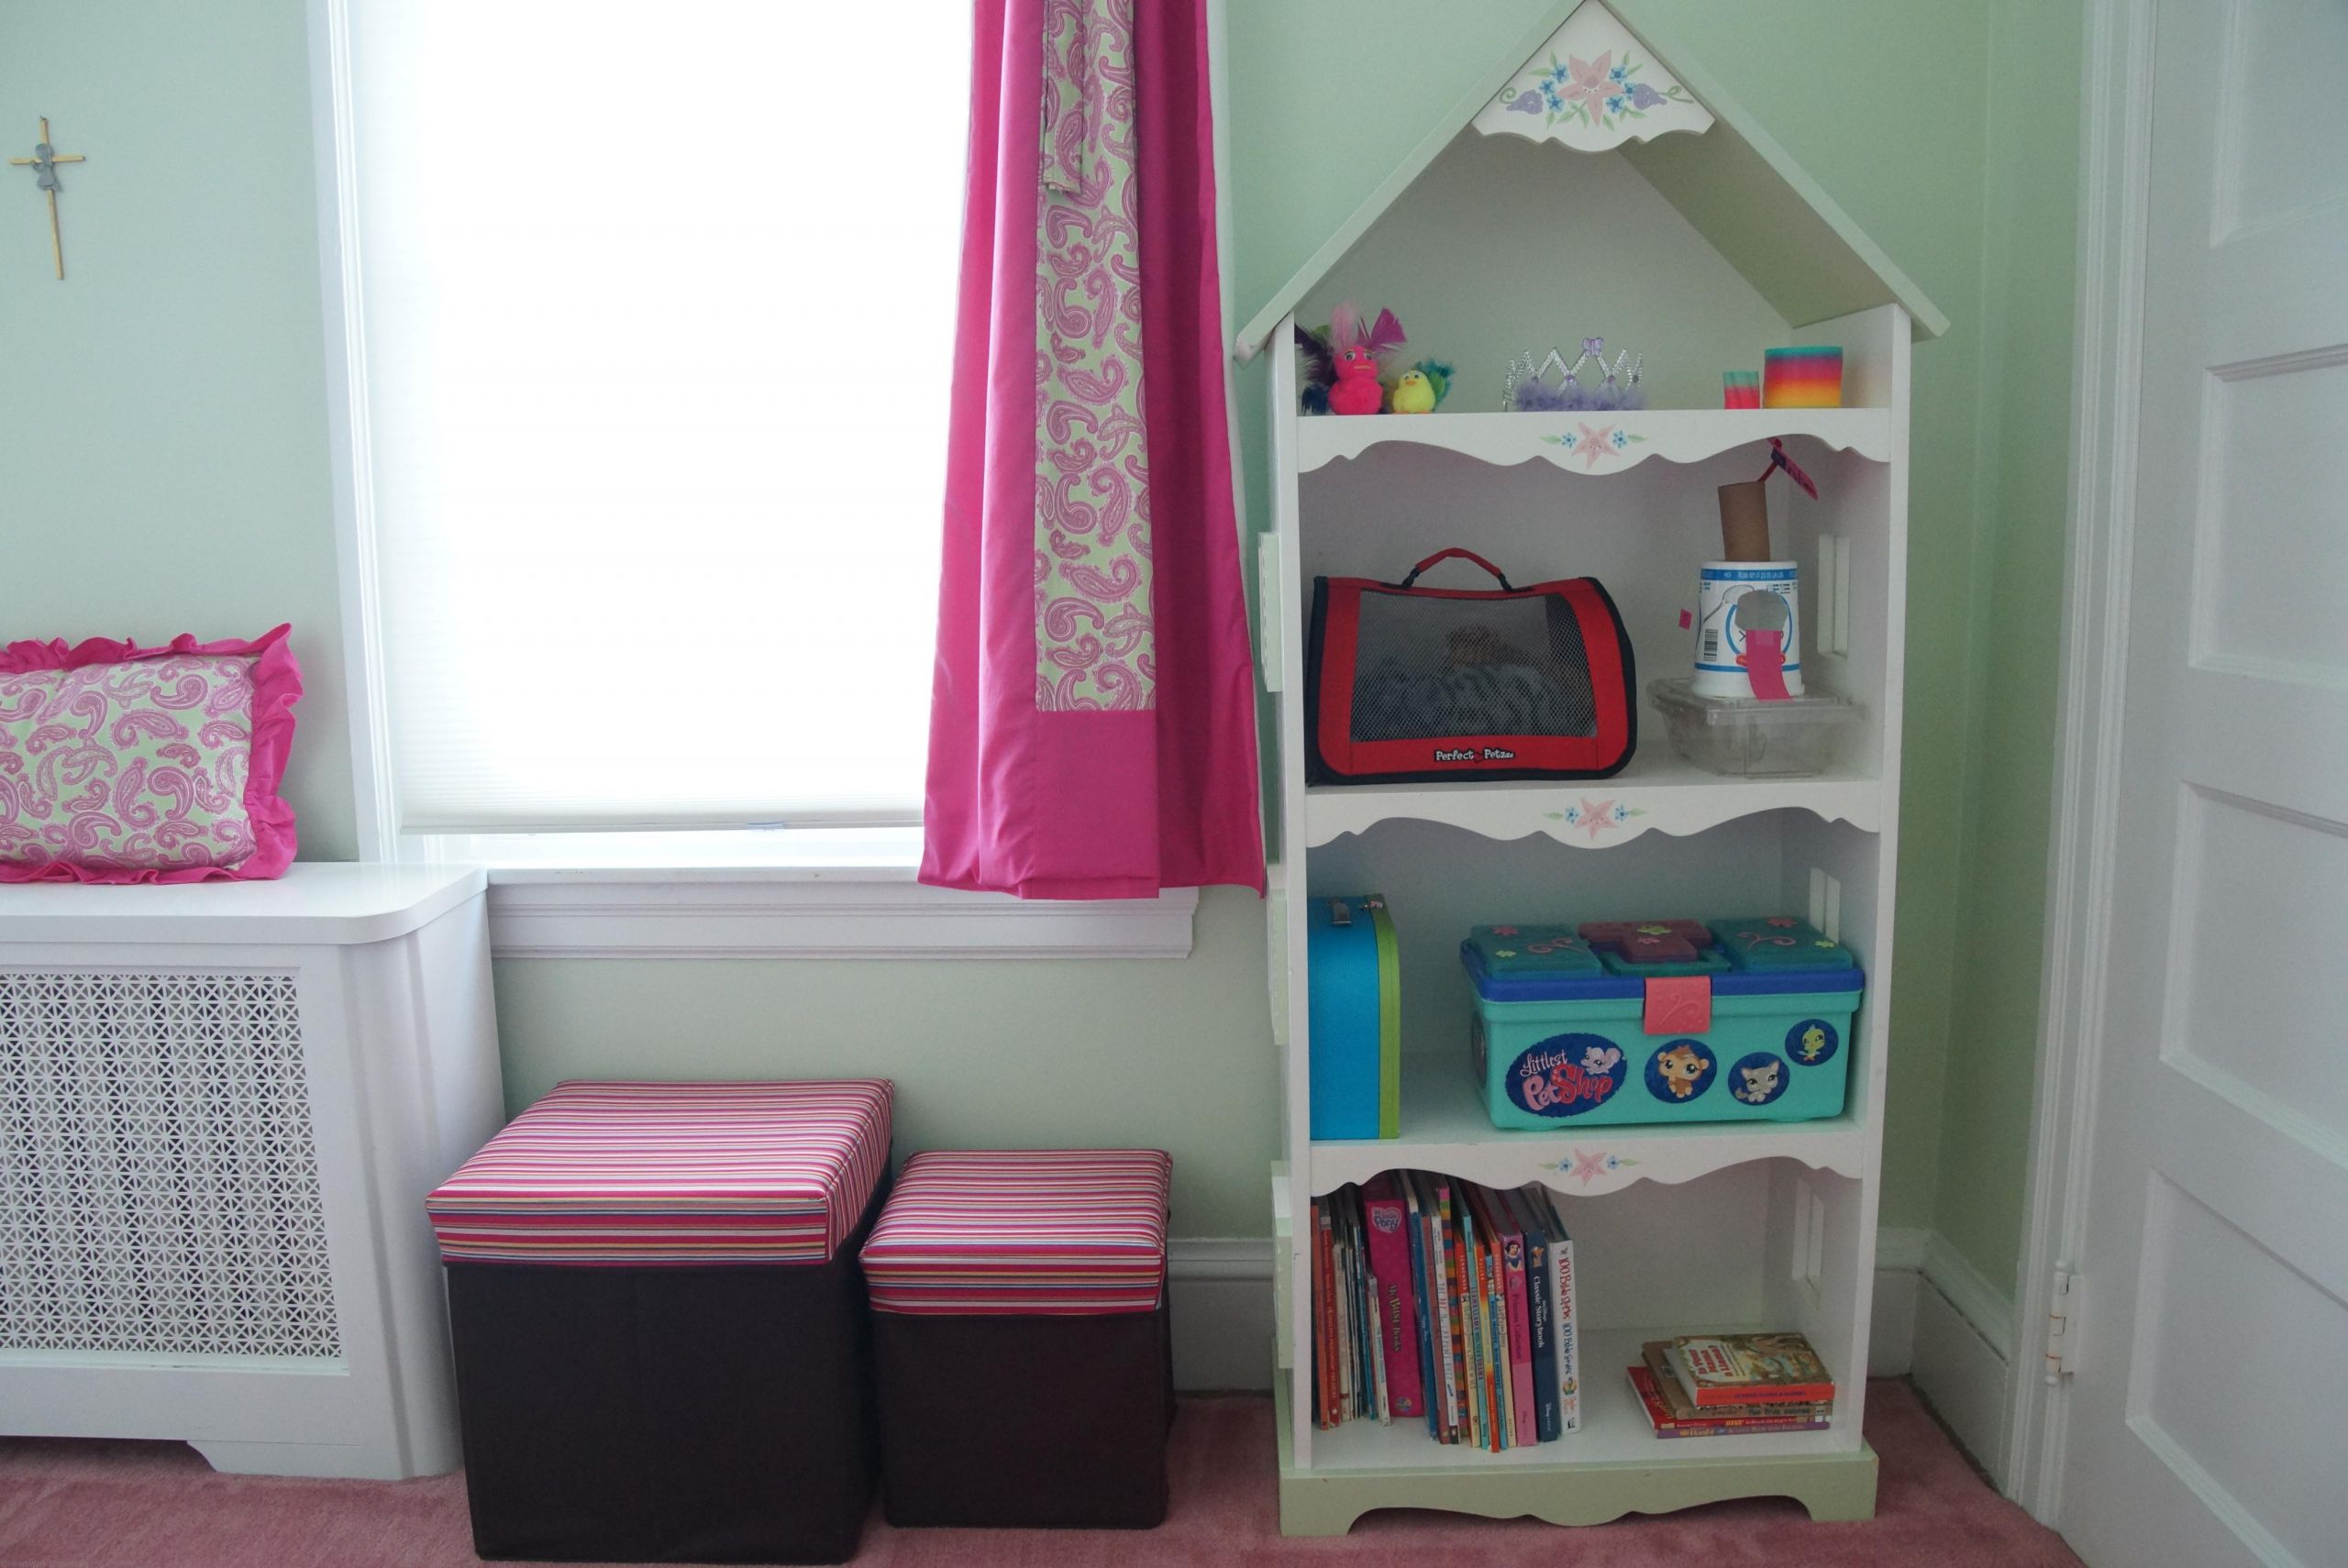 Organize Kids Room
 Cleaning a Kid s Room Organizing